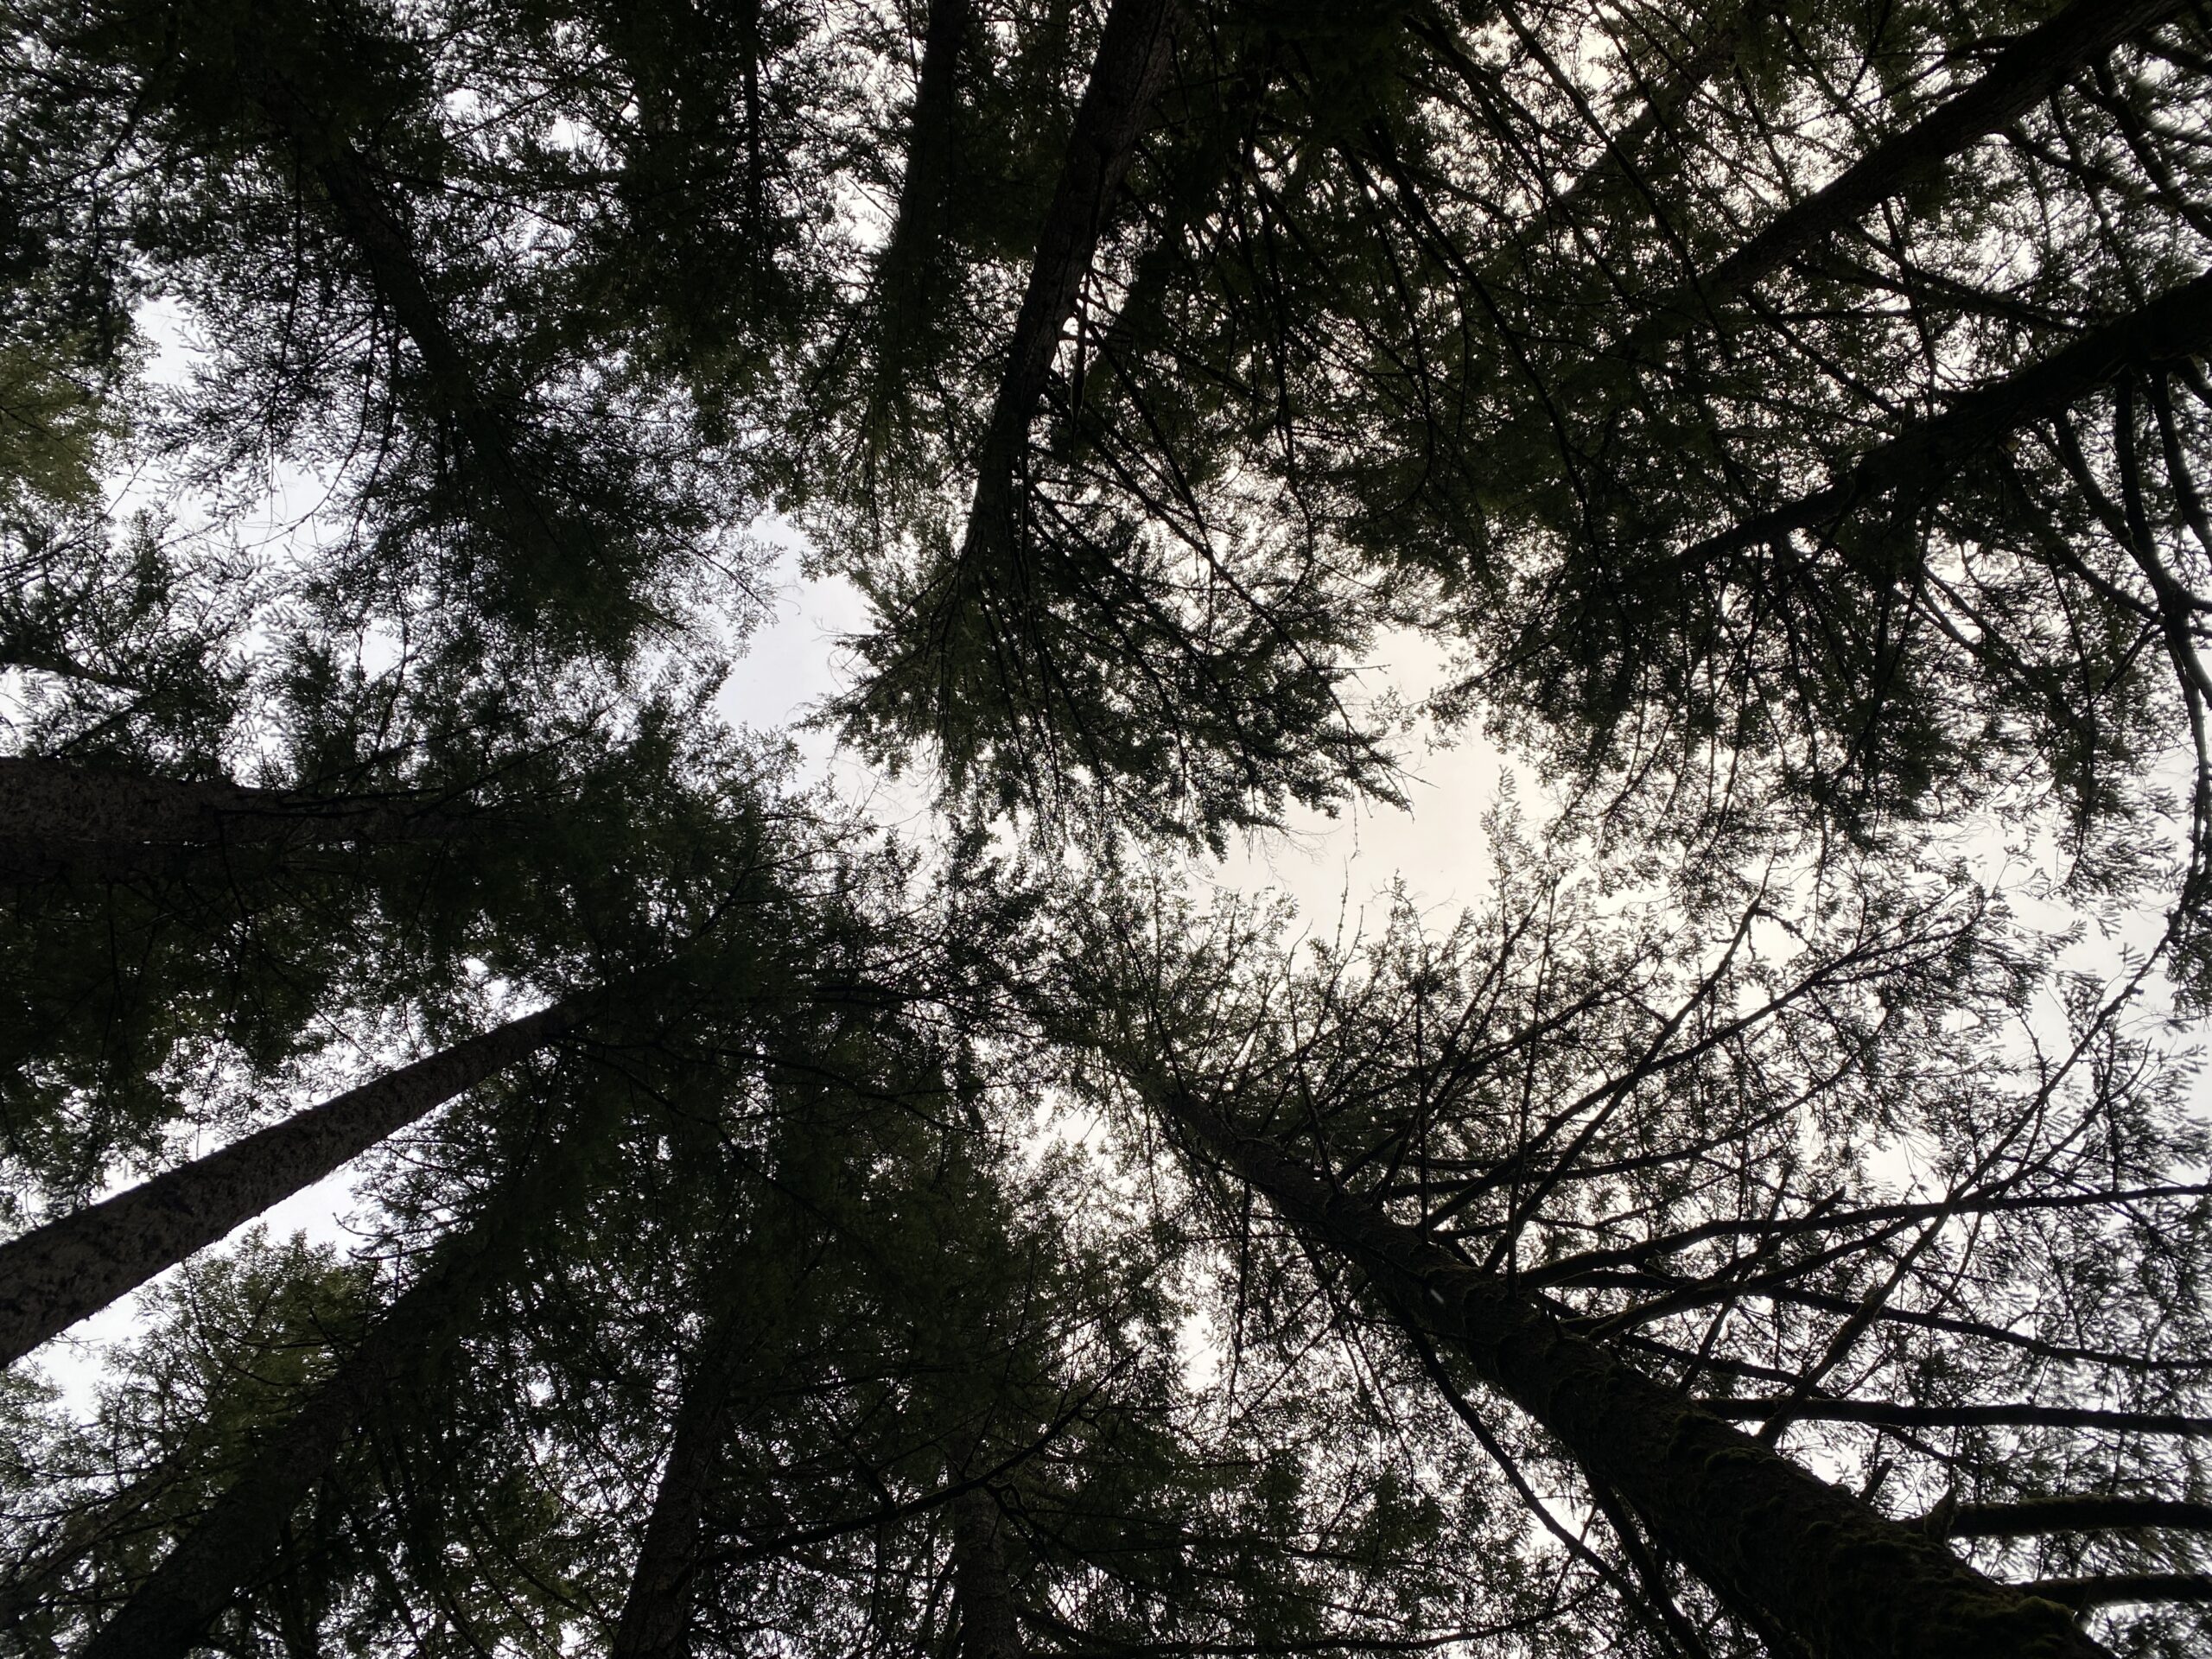 Forests are the best place for healing. Image of trees and sky.